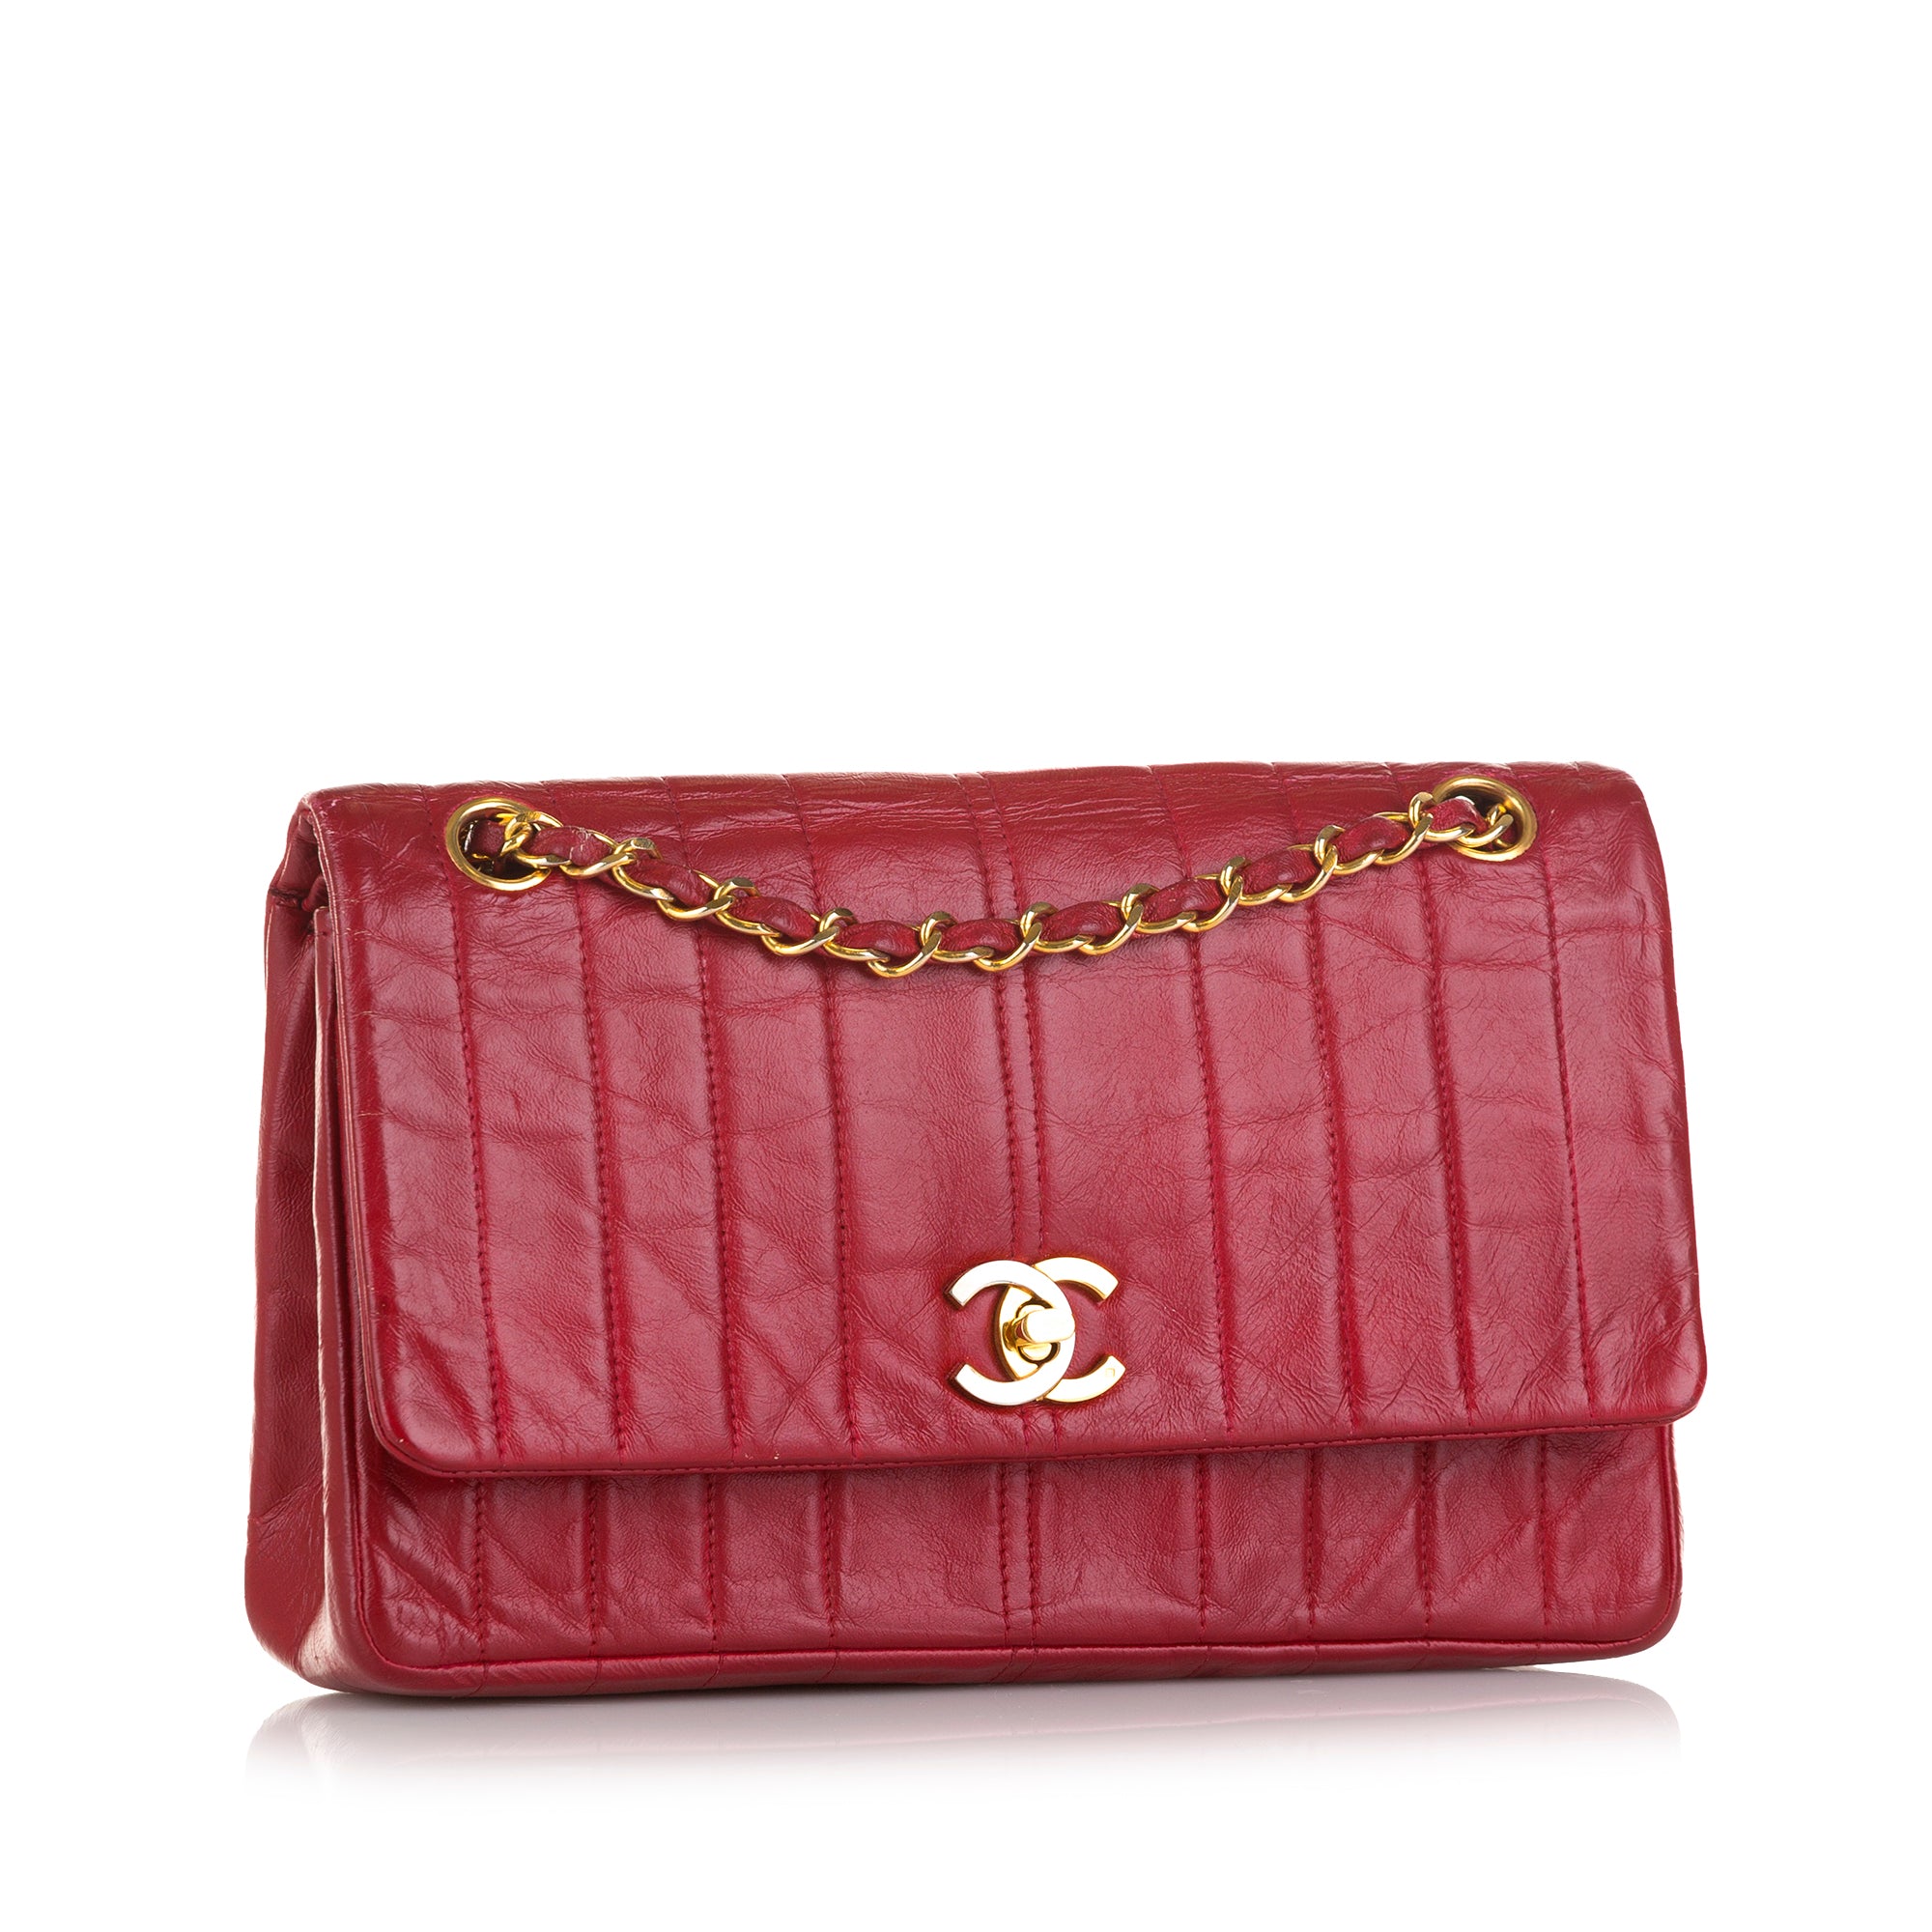 Chanel Medium Chevron Quilted Flap Bag in Coral Red Distressed Lambski